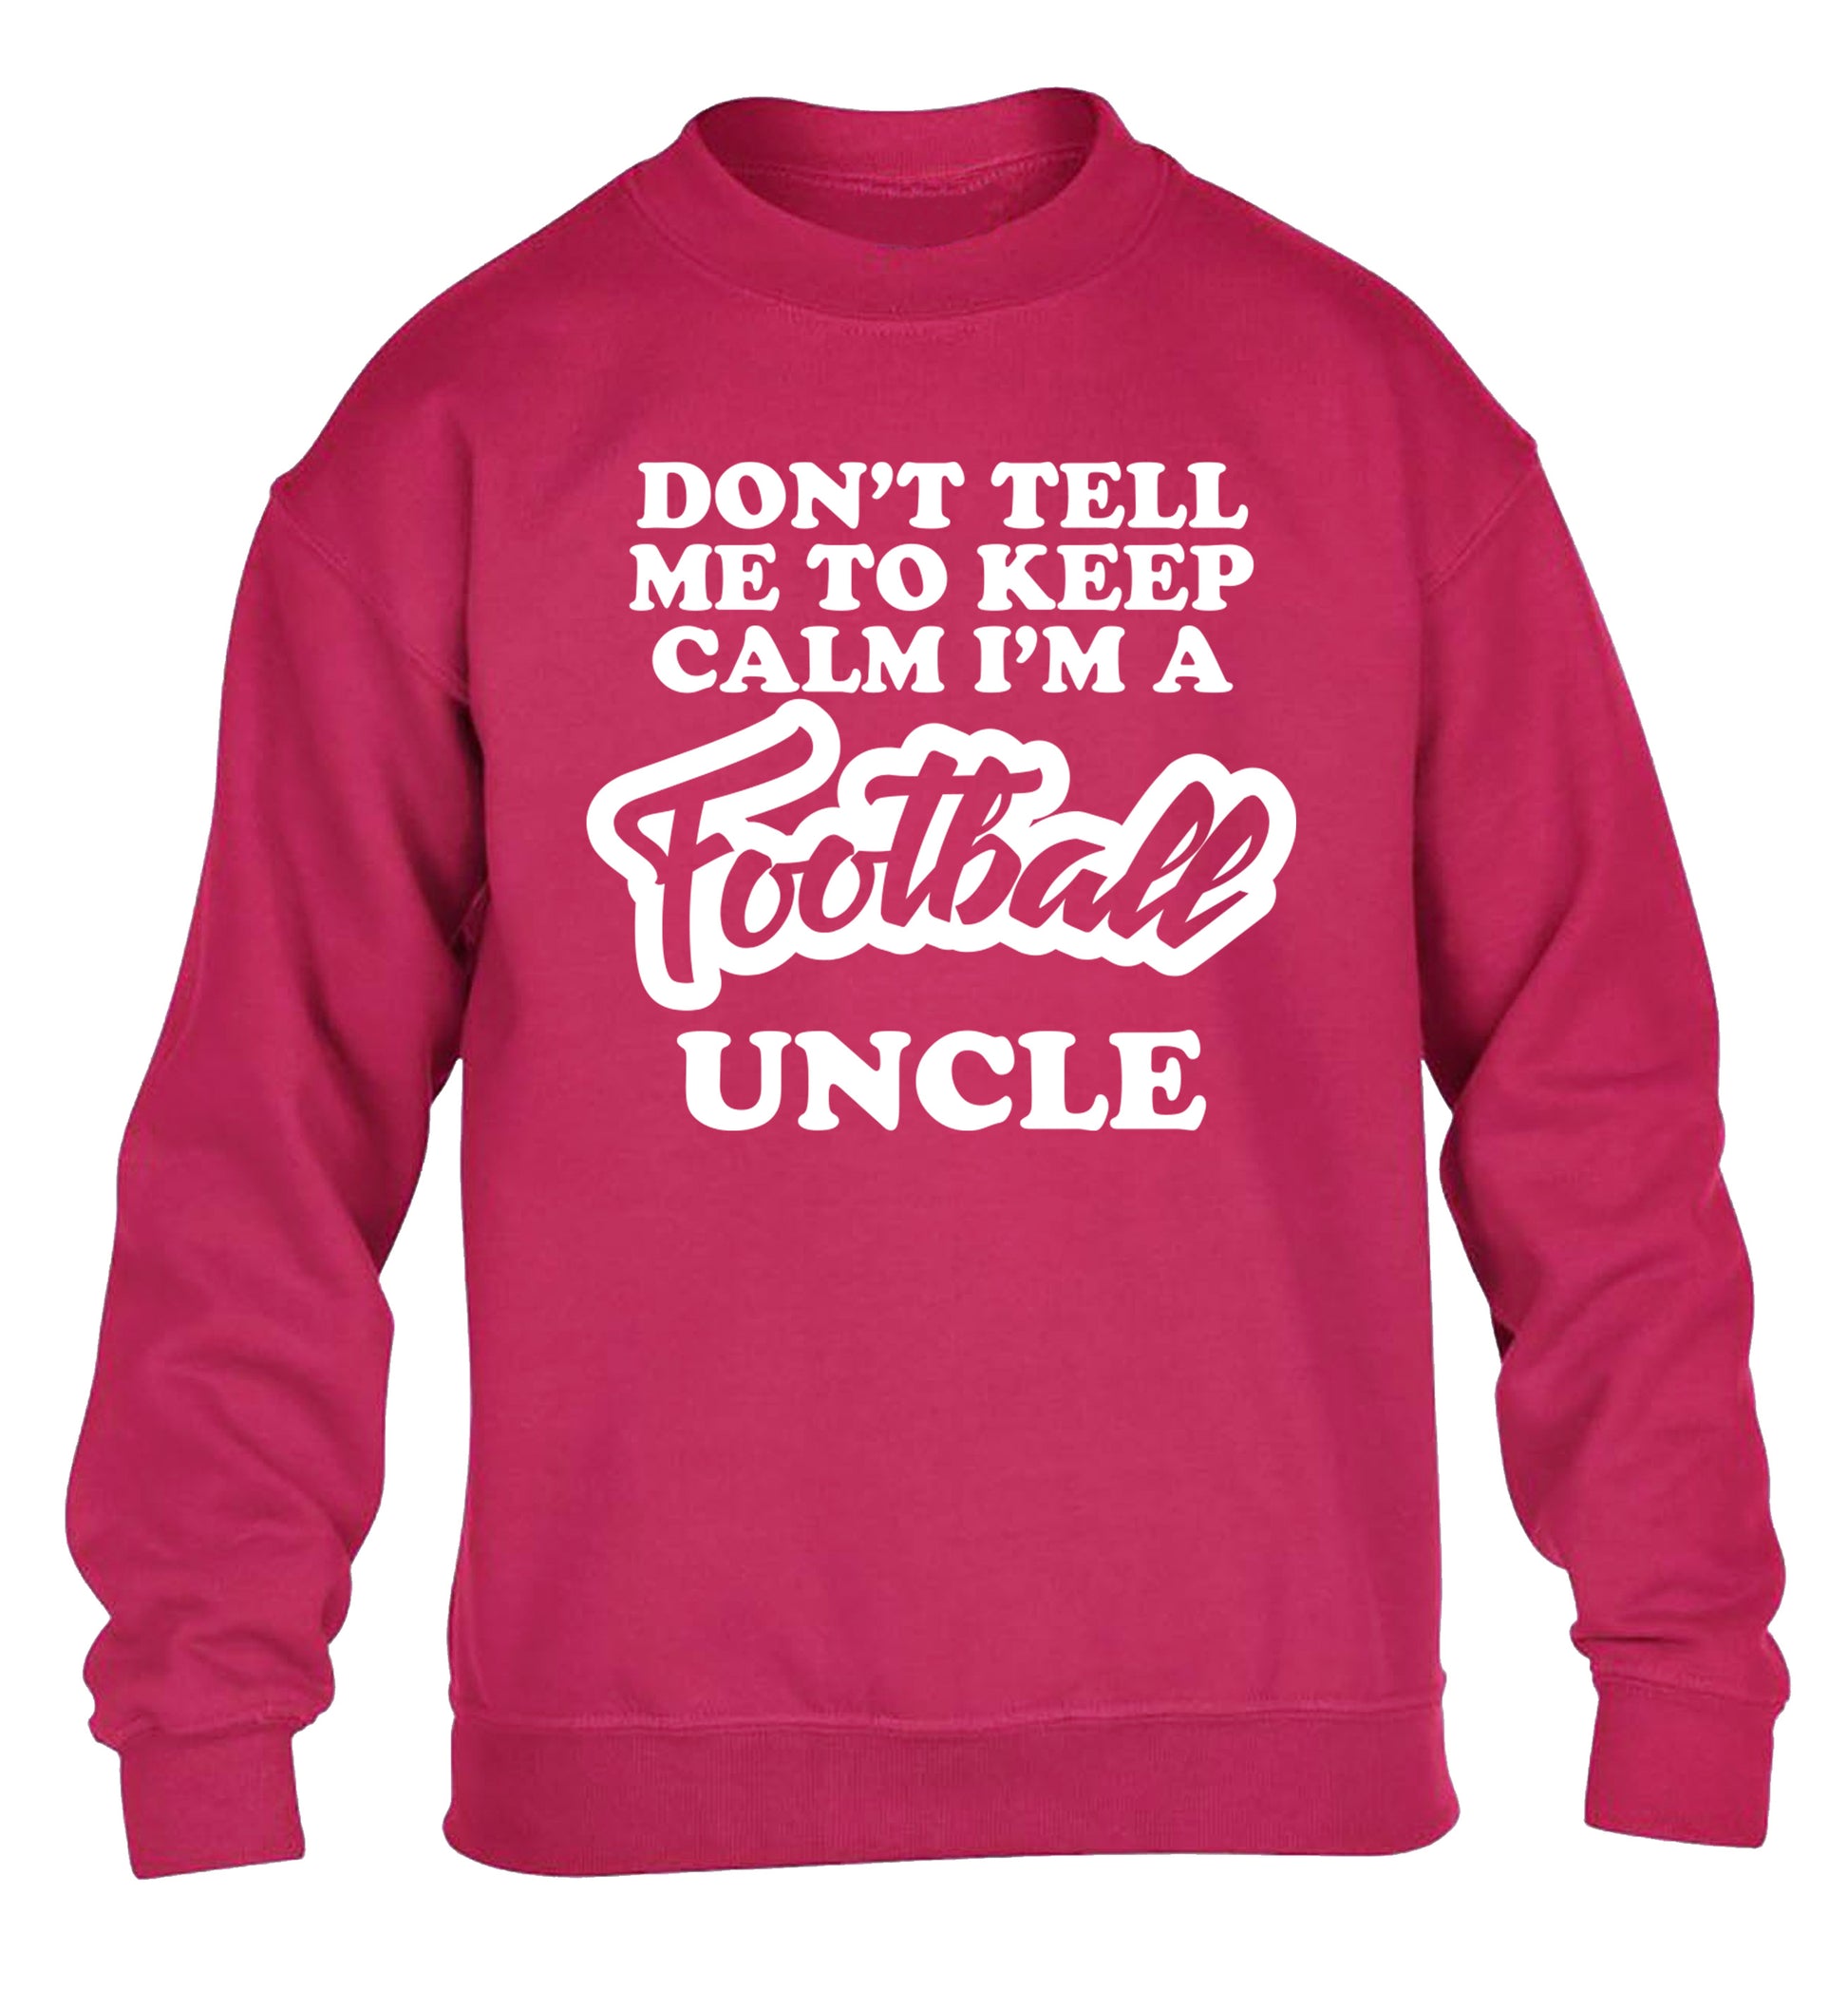 Worlds most amazing football uncle children's pink sweater 12-14 Years